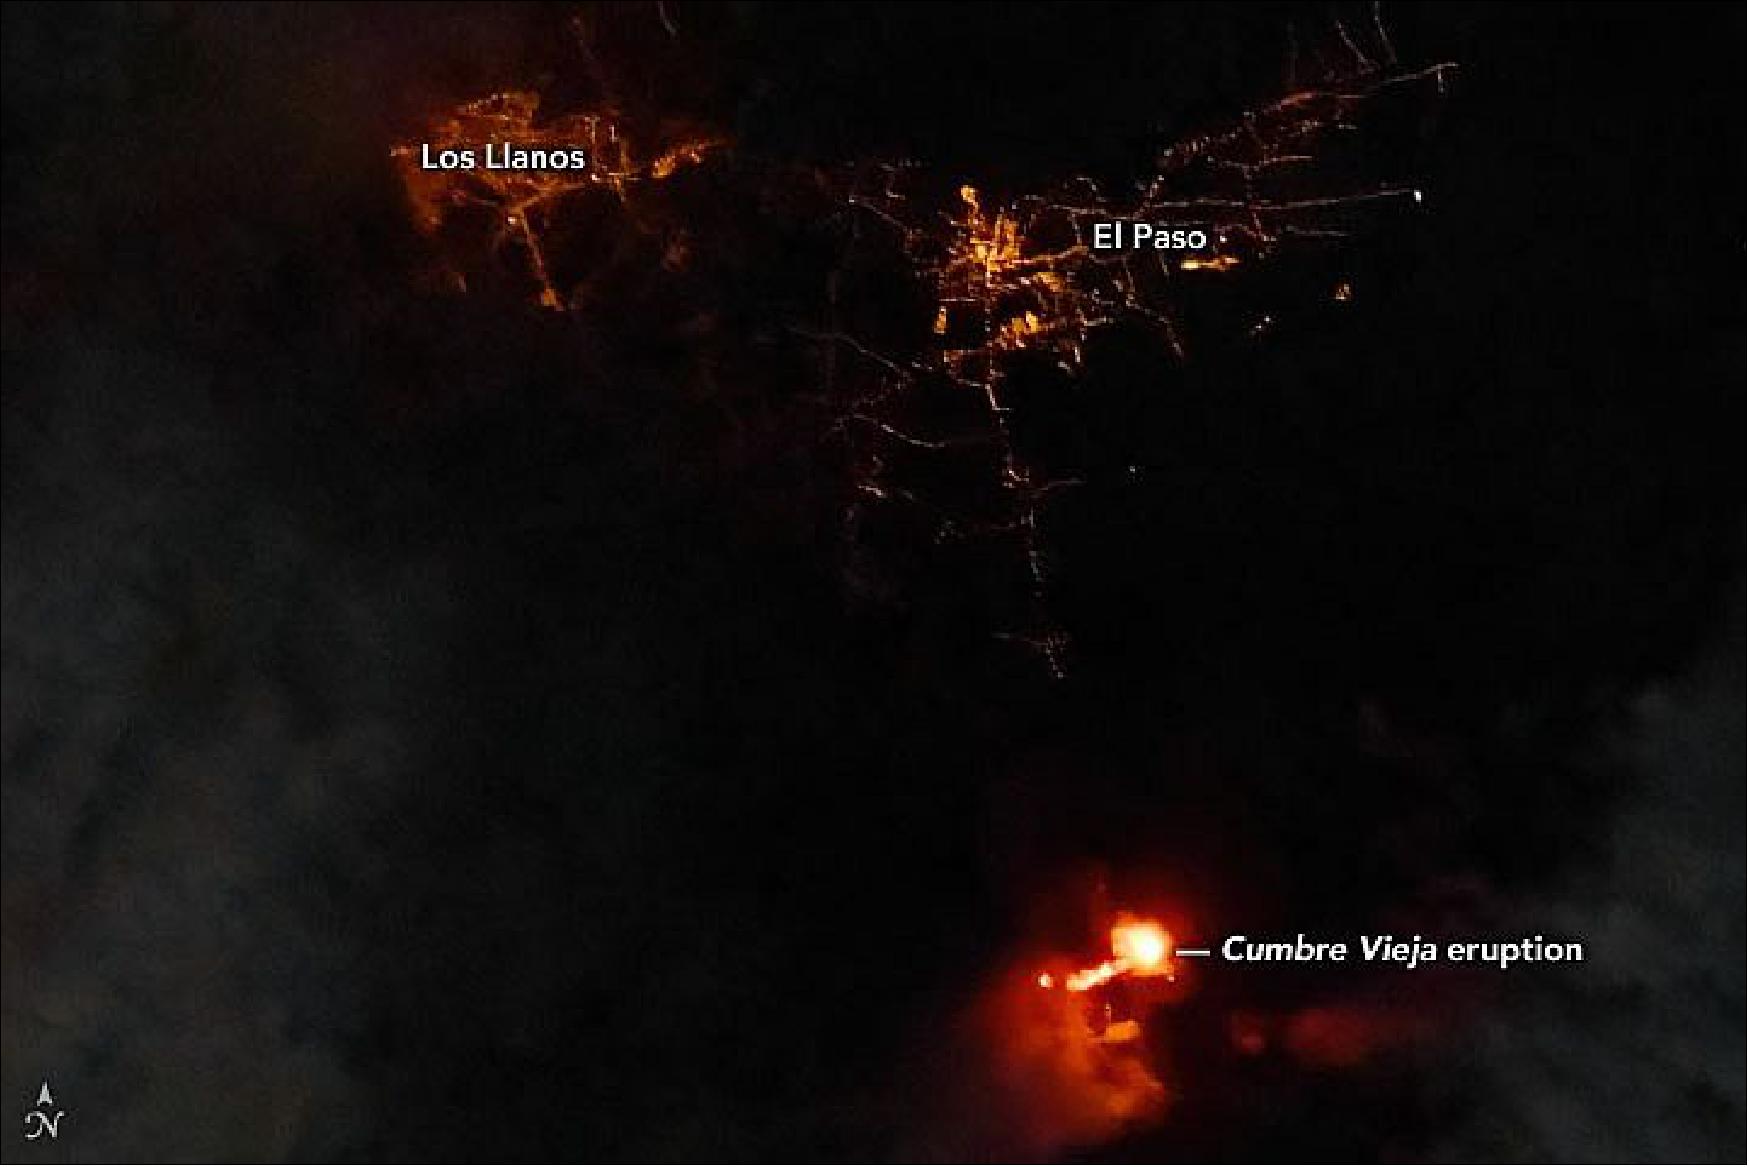 Figure 34: An astronaut photograph shows the proximity of a volcanic eruption to nearby cities on the Spanish island of La Palma. The photograph was taken by a member of the Expedition 65 crew. The image has been cropped and enhanced to improve contrast, and lens artifacts have been removed (image credit: NASA Earth Observatory, Story by Kathryn Hansen)